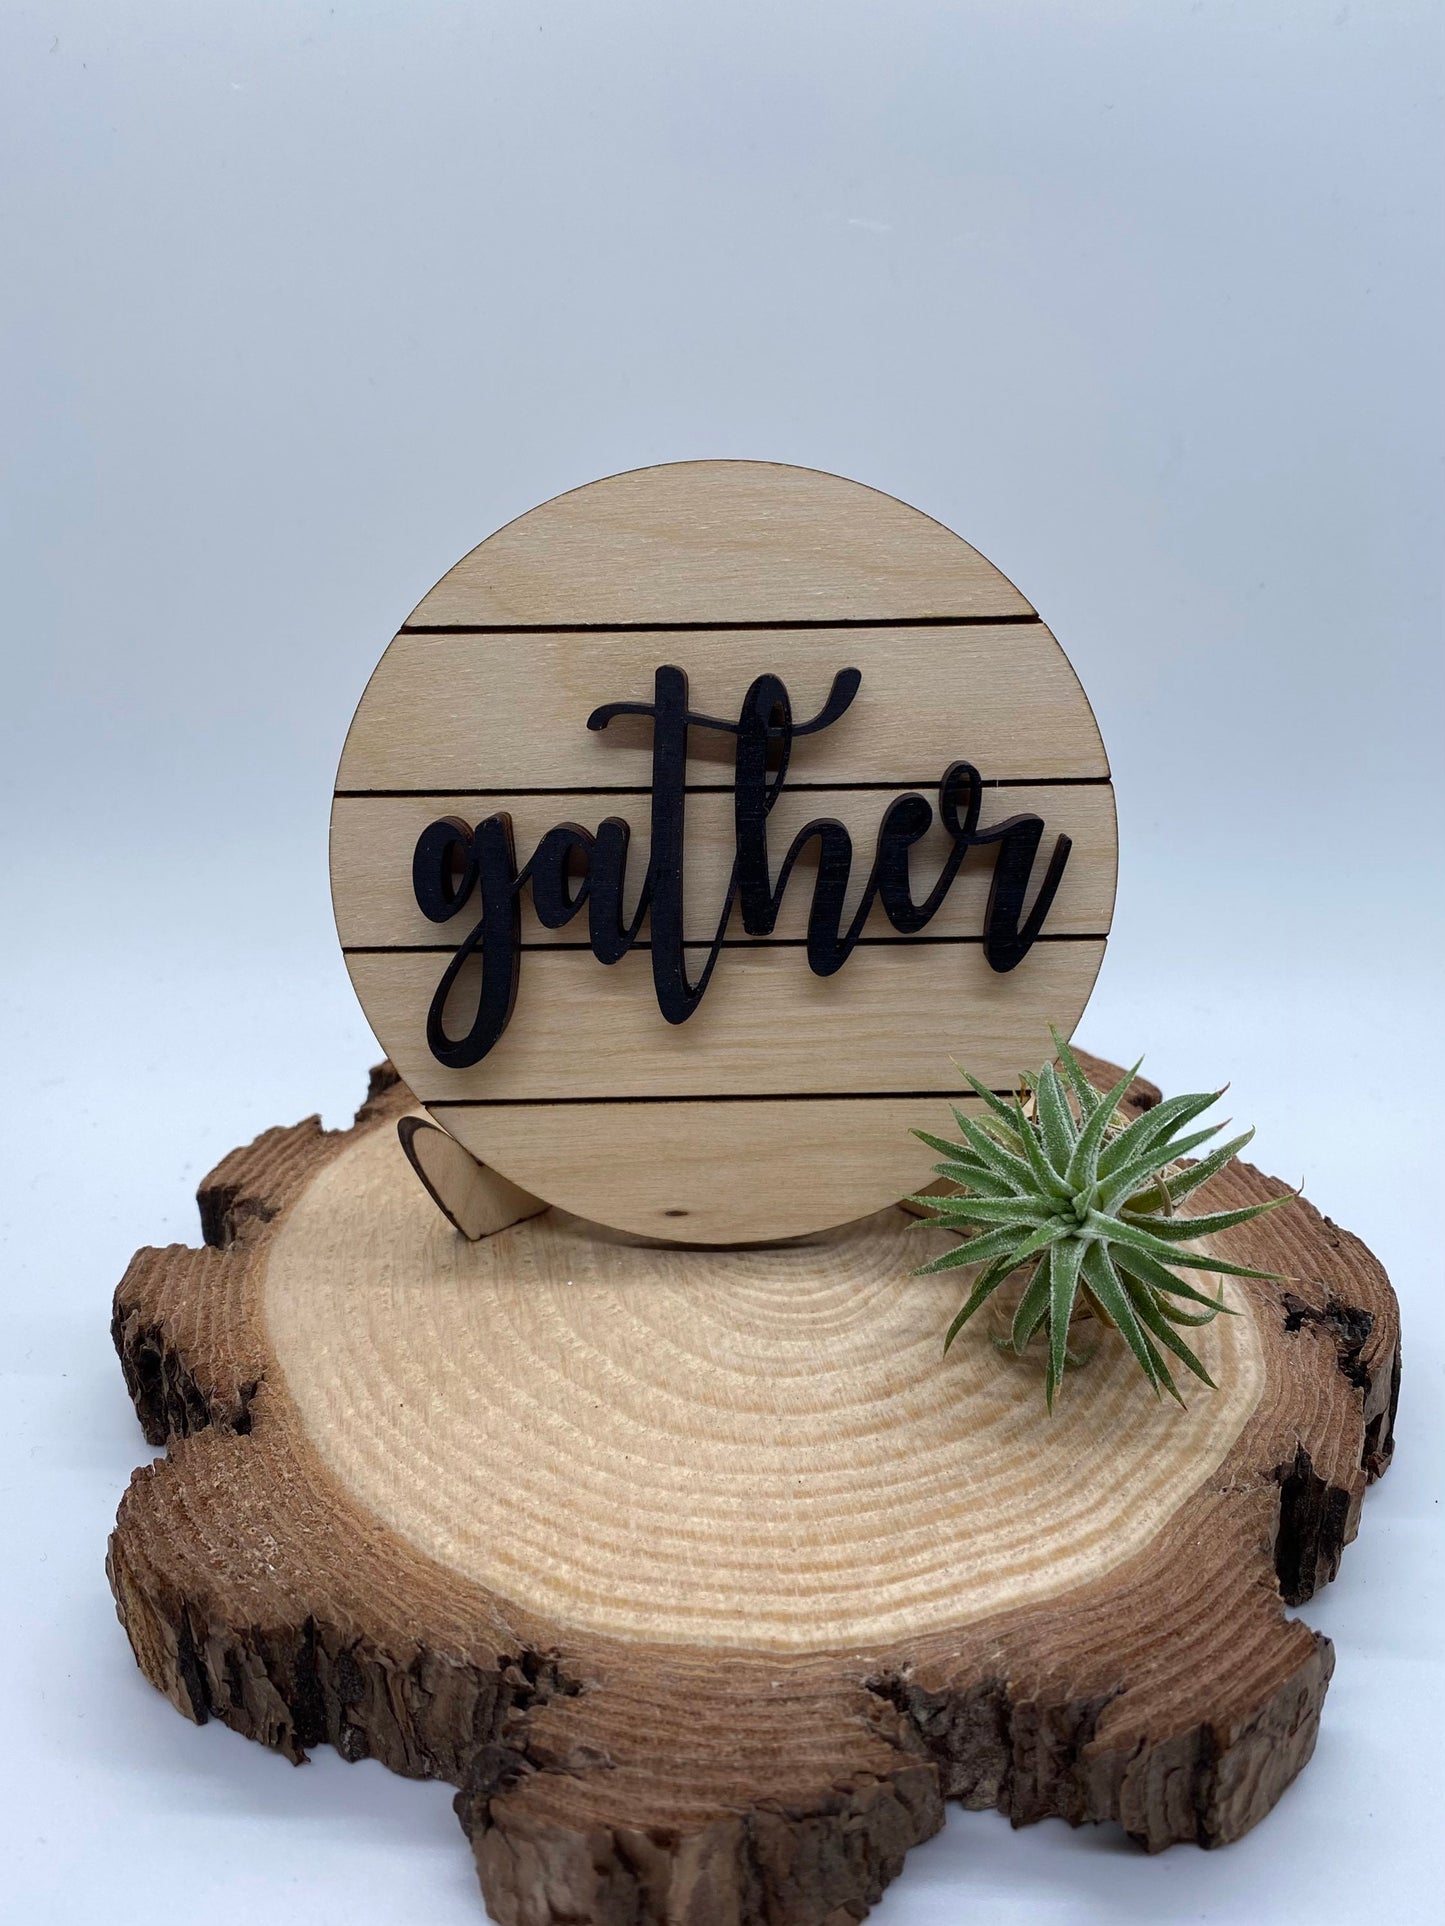 Gather Tiered Tray Sign, Shiplap Inspired Tray Sign, Tiered Tray Decor, 4” Round Tiered Tray Sign, Wood Tiered Tray Sign, Tiered Tray